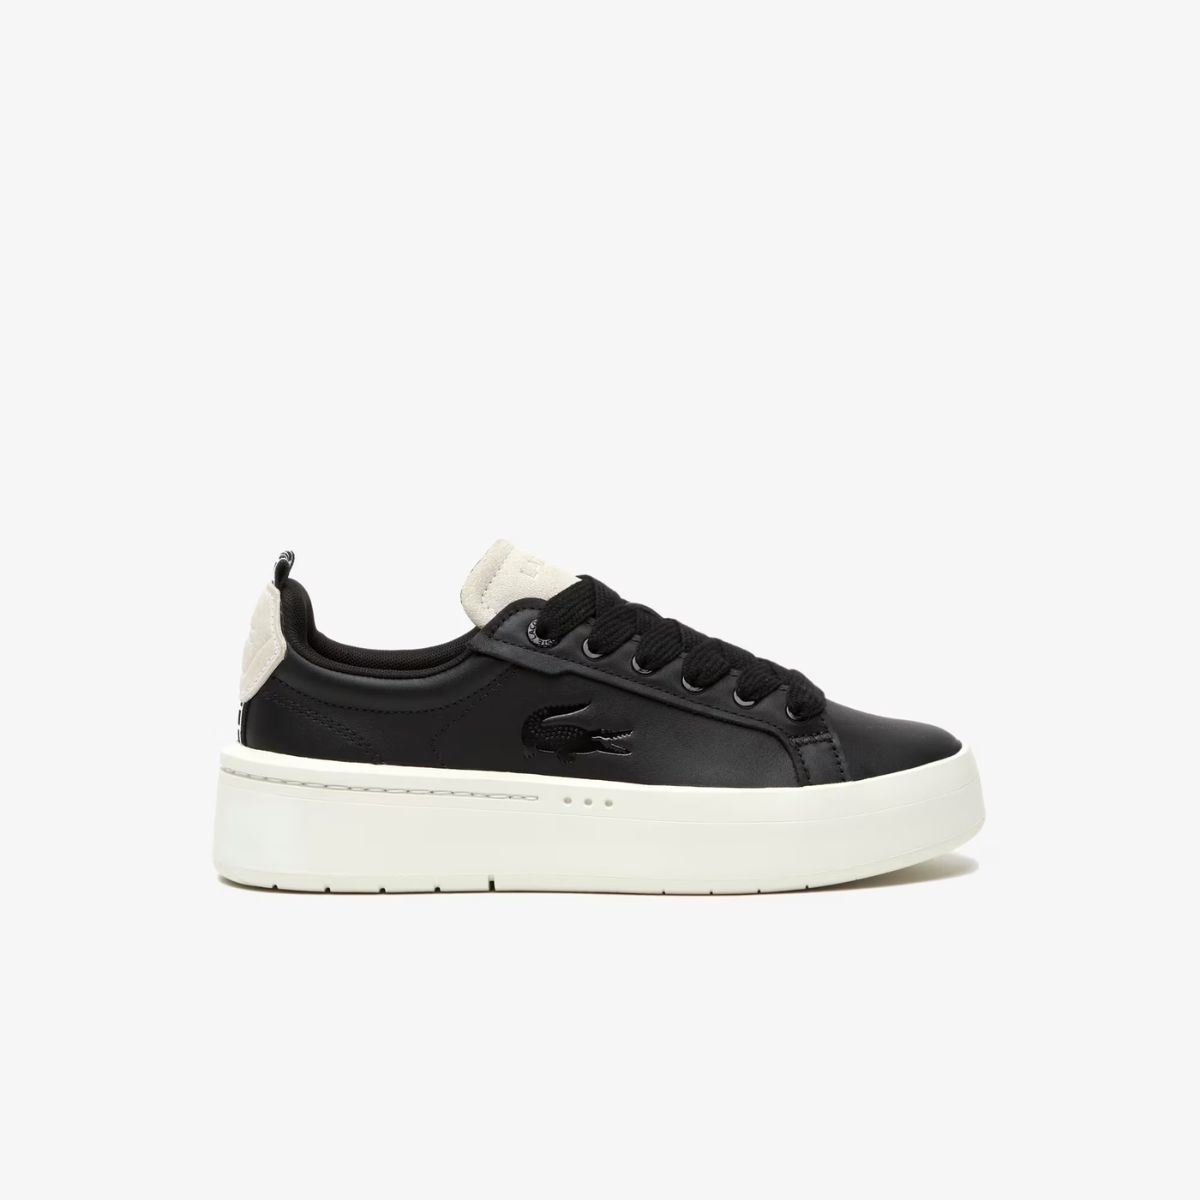 Lacoste Carnaby Platform Black Off White - Issimo Shoes